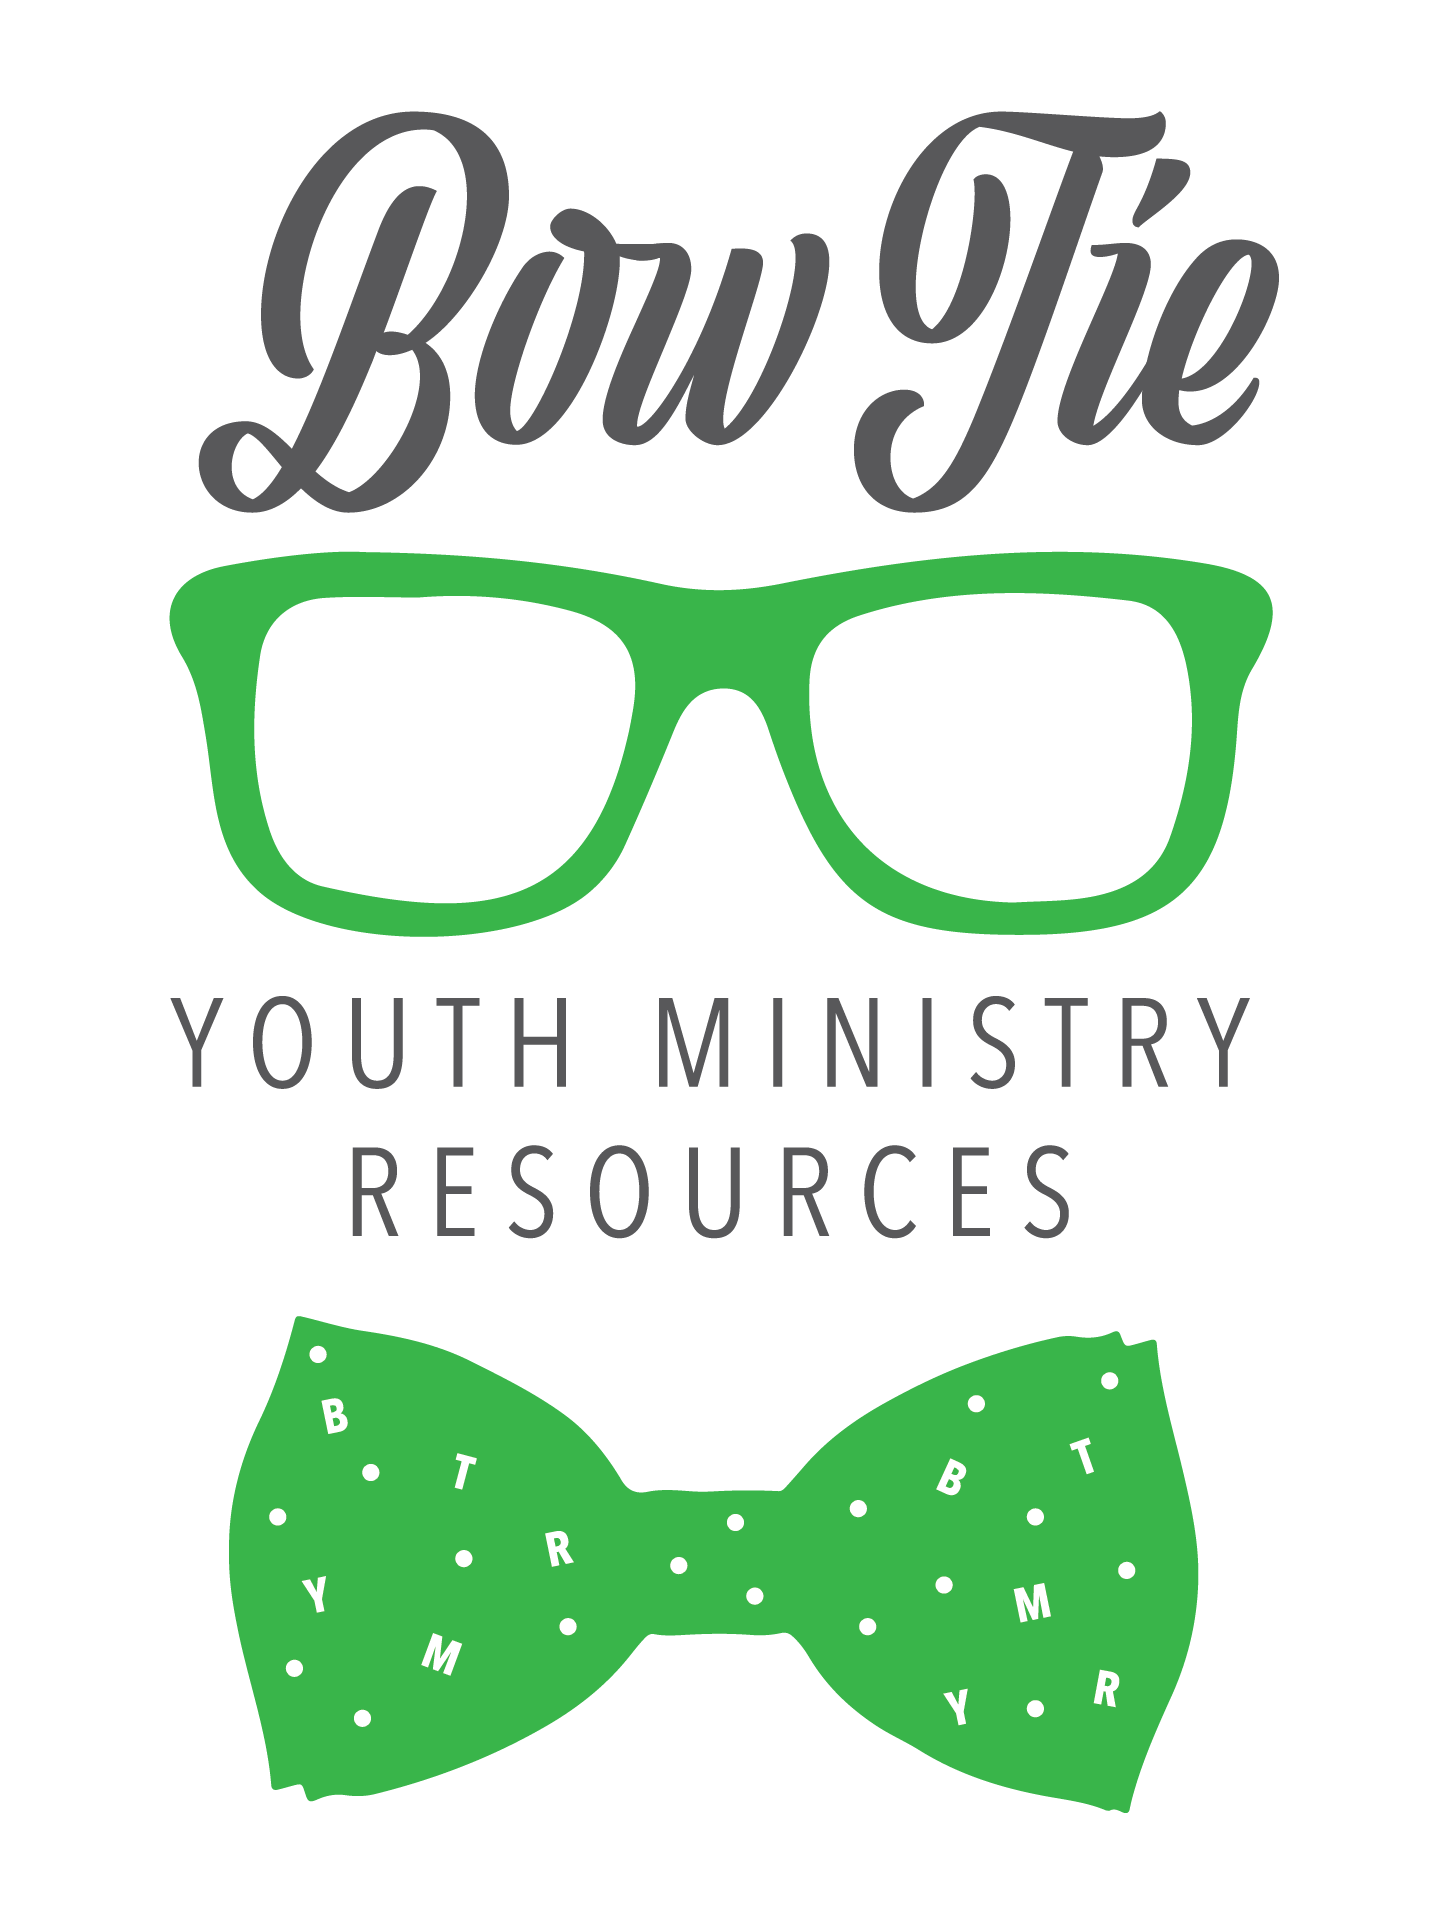 Bow Tie Youth Ministry Resources